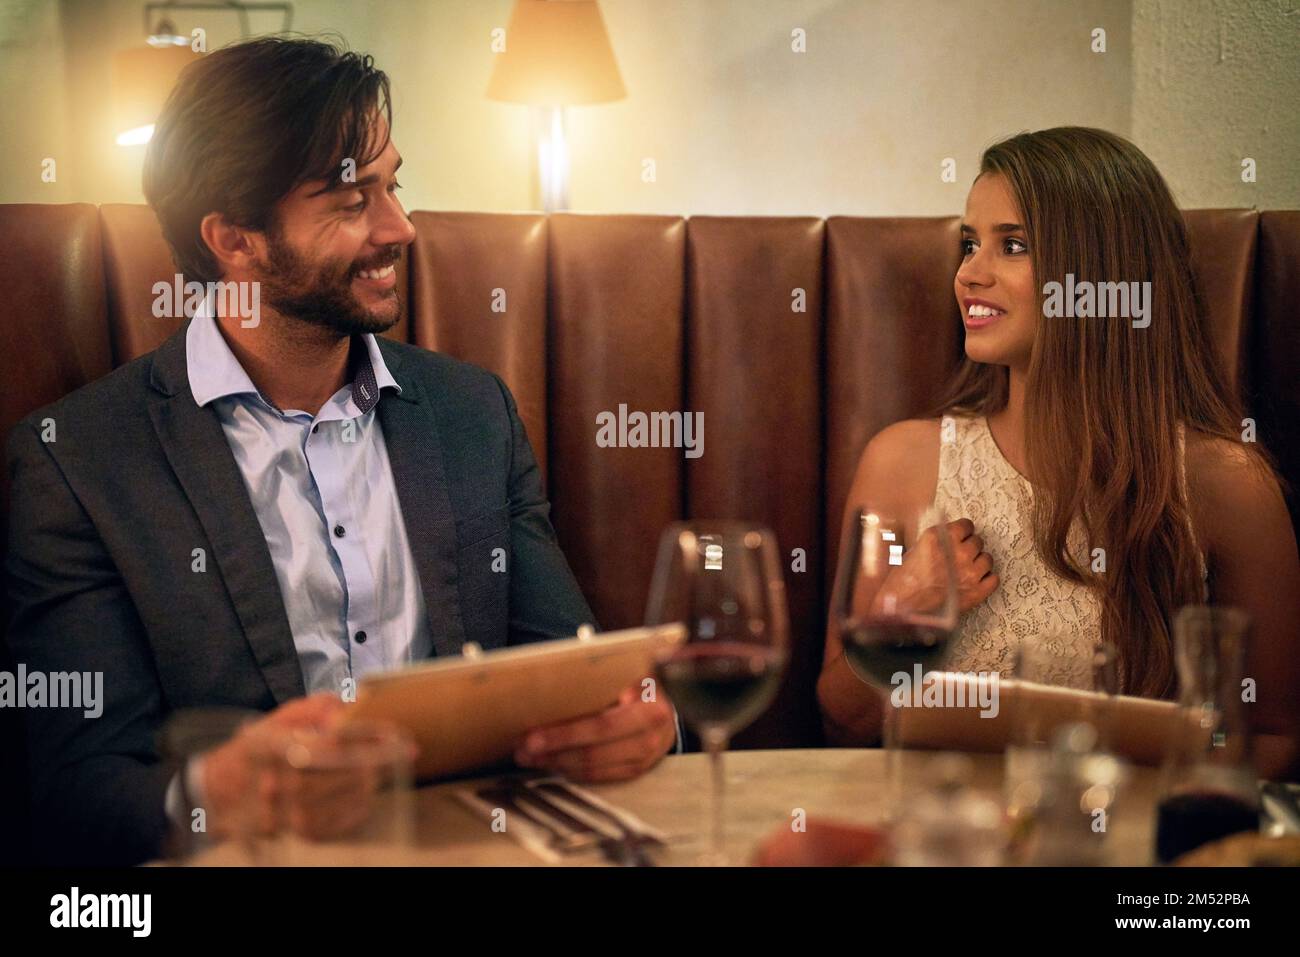 Romance is on the menu. a happy young couple reading the menu during a romantic dinner date at a restaurant. Stock Photo